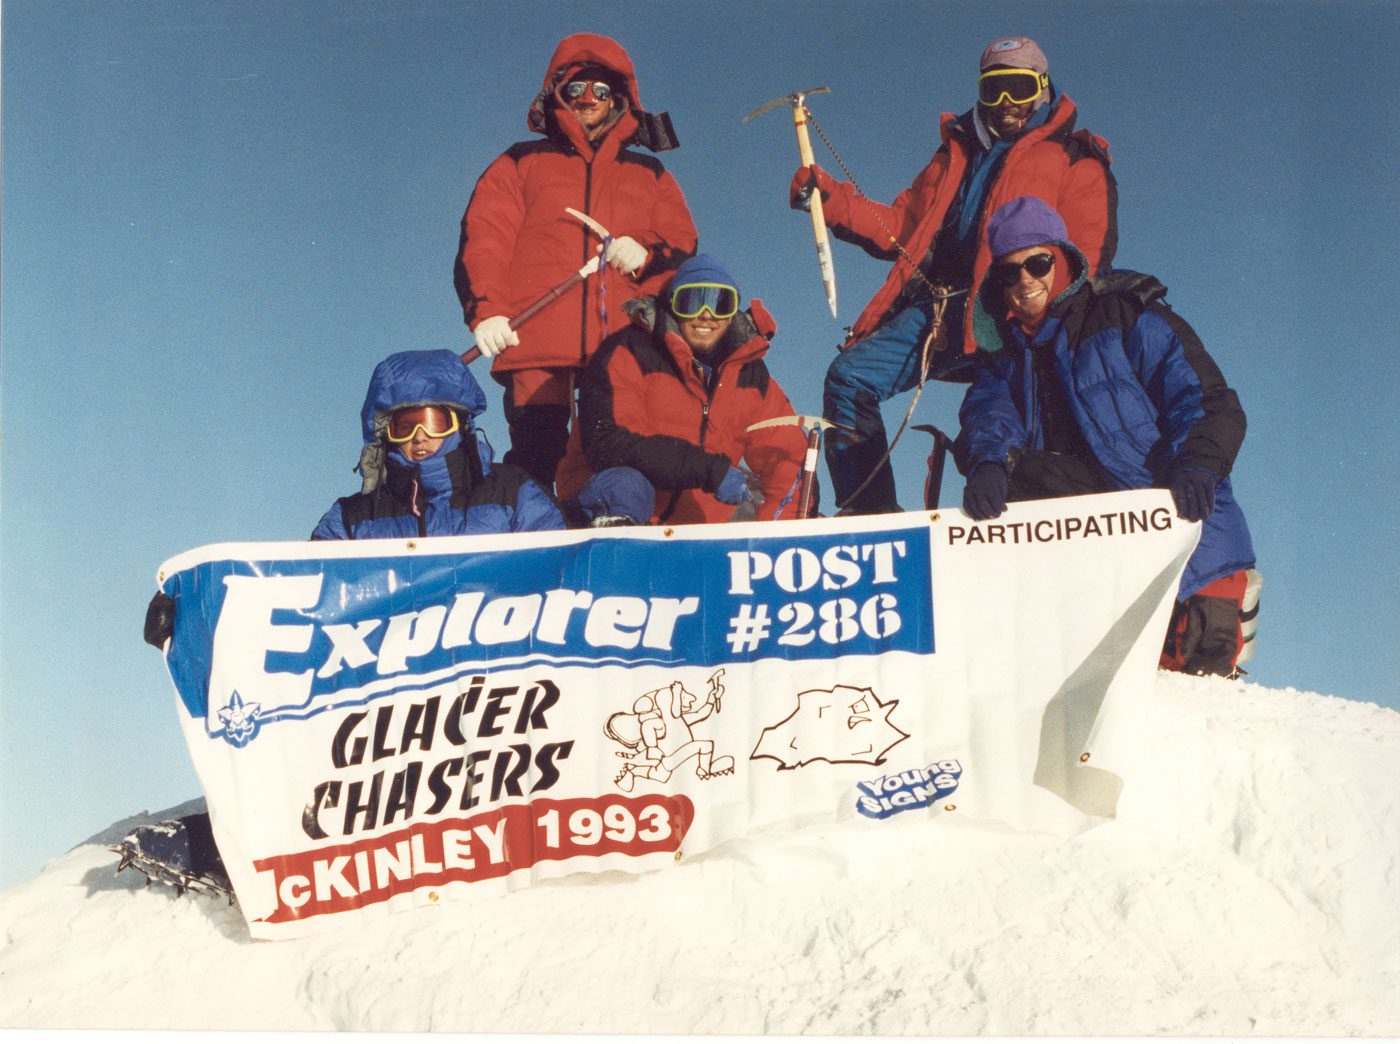 Stacy Taniguchi stands atop Denali with four Boy Scouts. They hold a vinyl sign up with their Scout post number and troop name.